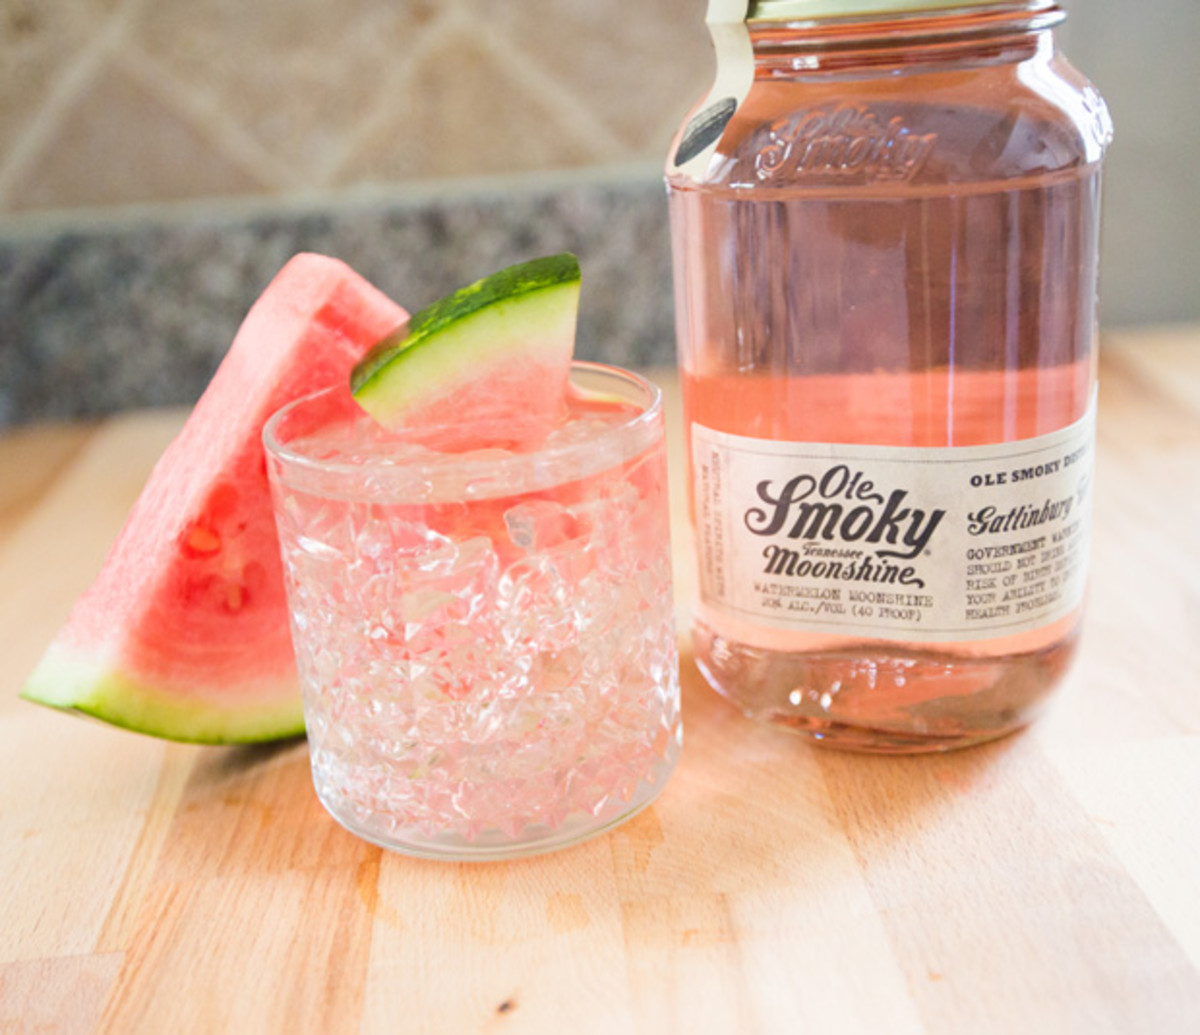 Watermelon moonshine. Click the link for the recipe as well as additional big batch moonshine cocktail recipes.